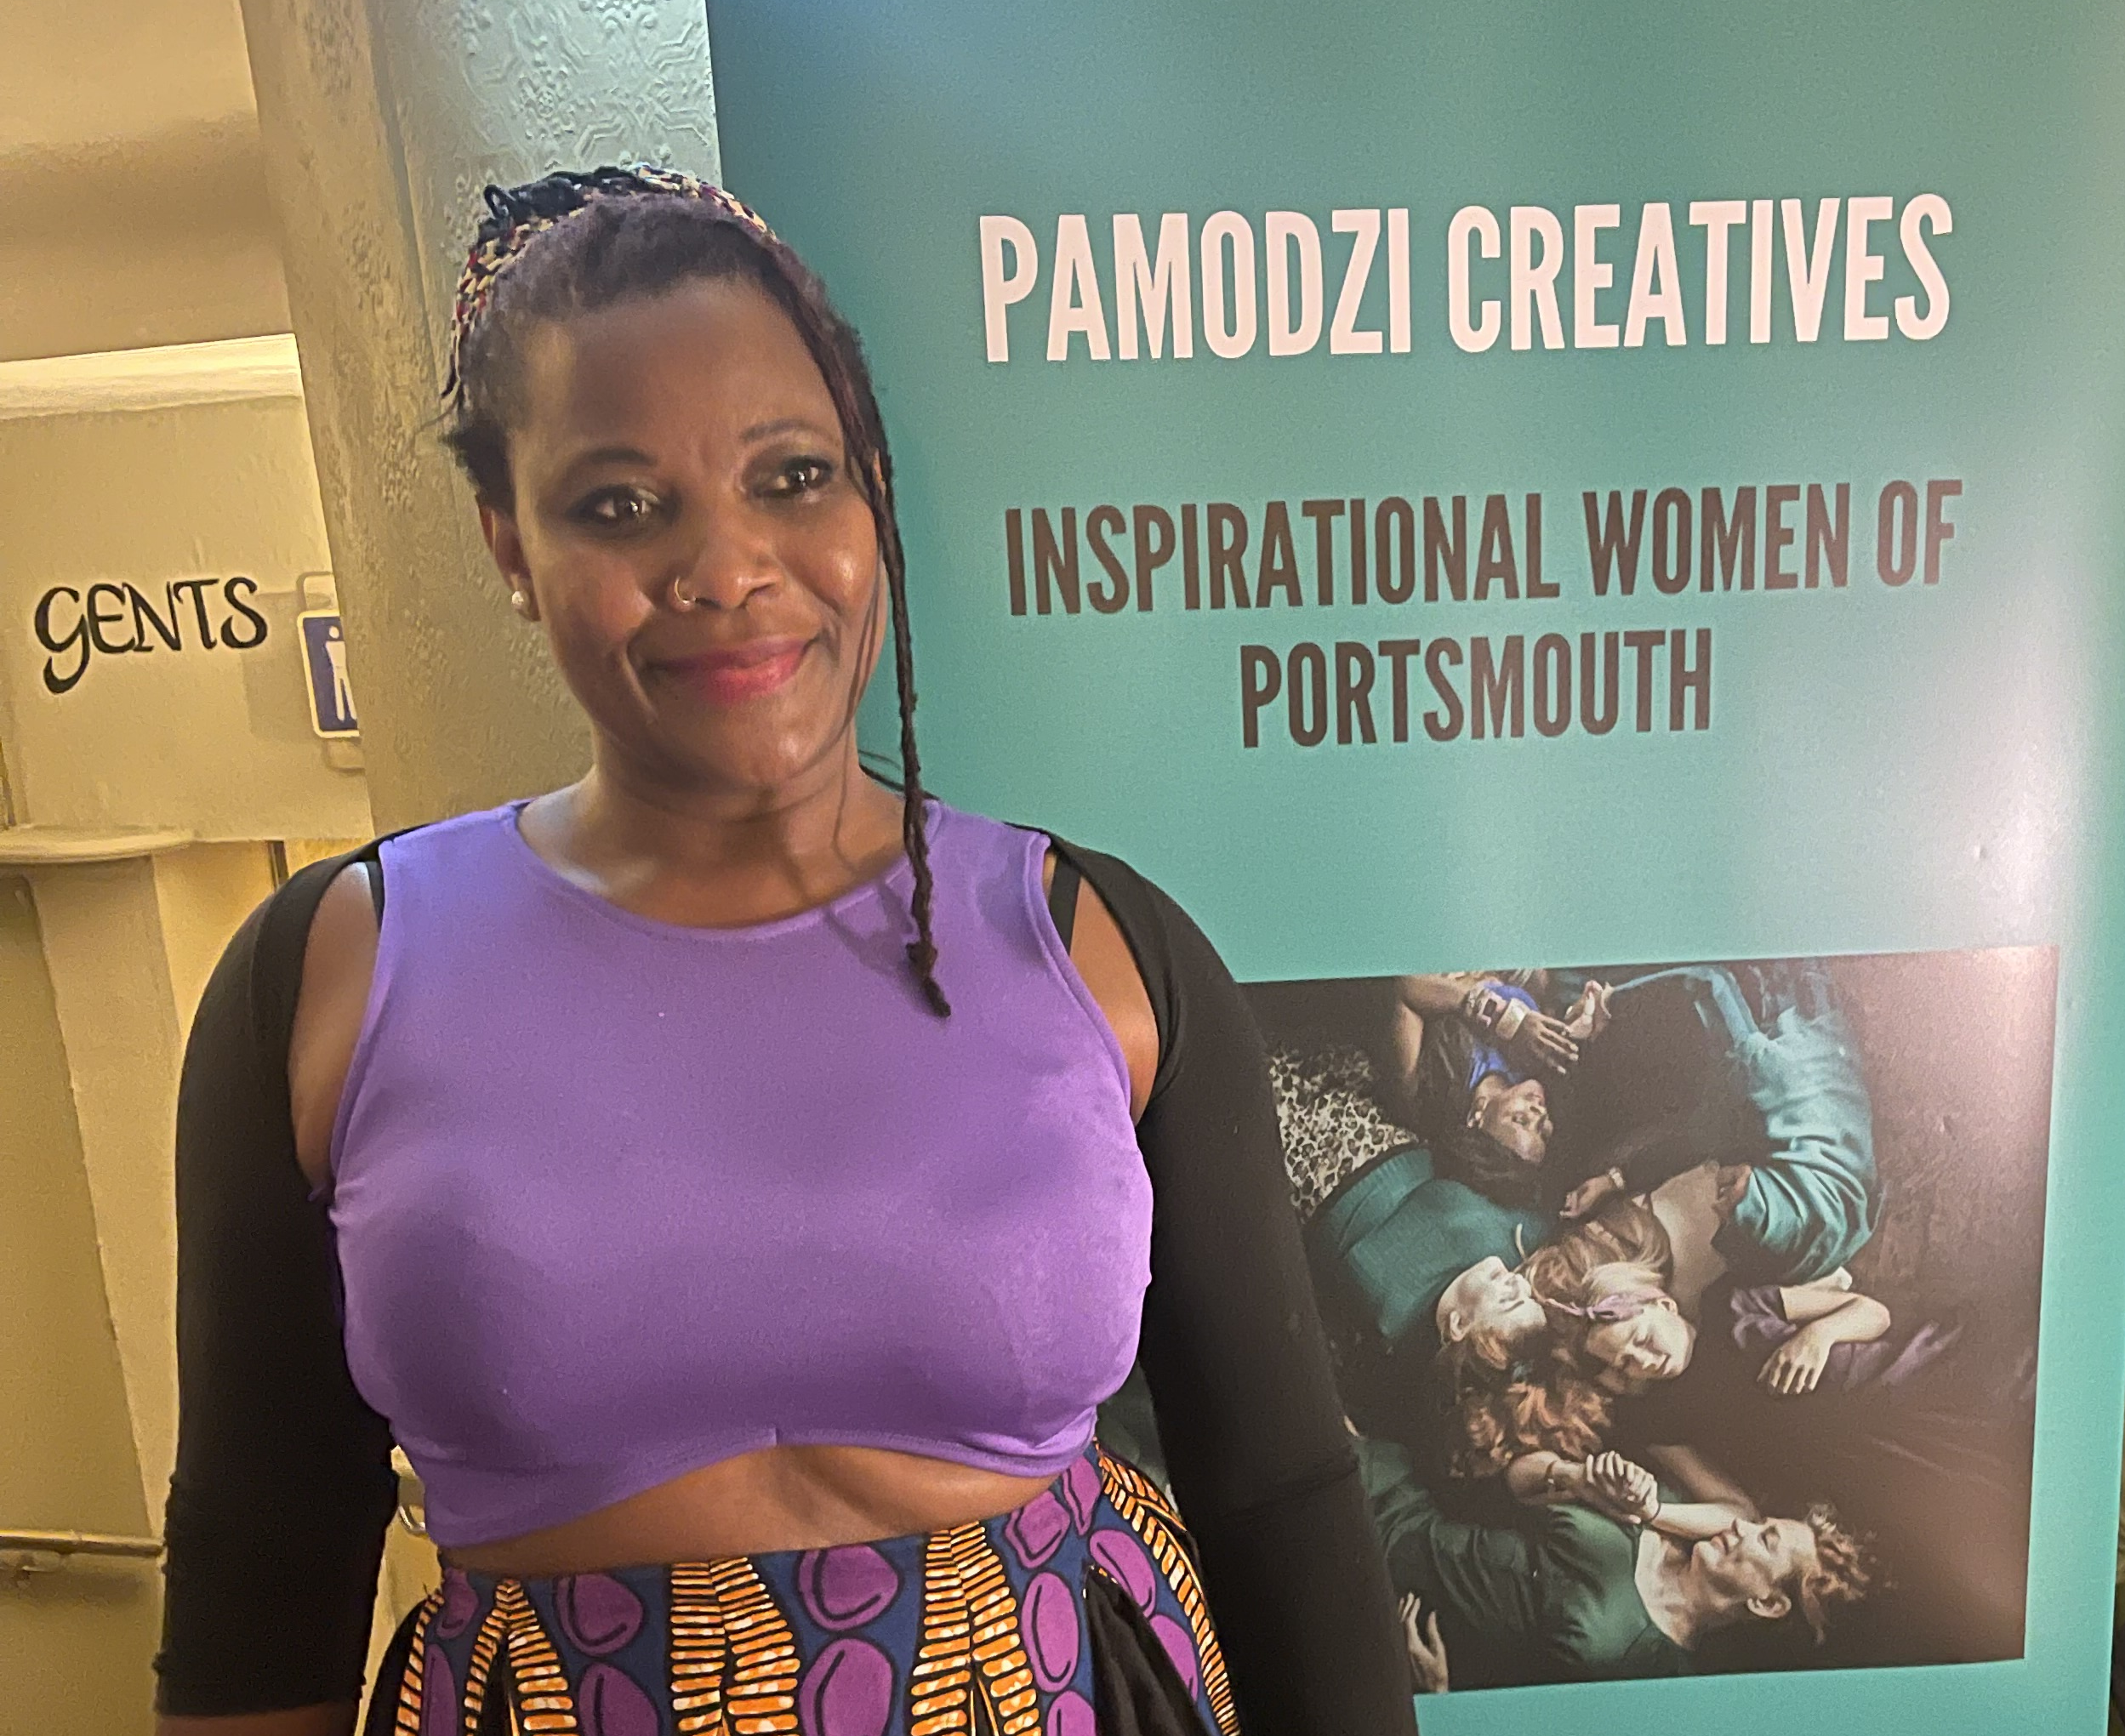 Best Social Media Platforms for Charities - Roni Edwards from Pamodzi Creatives.